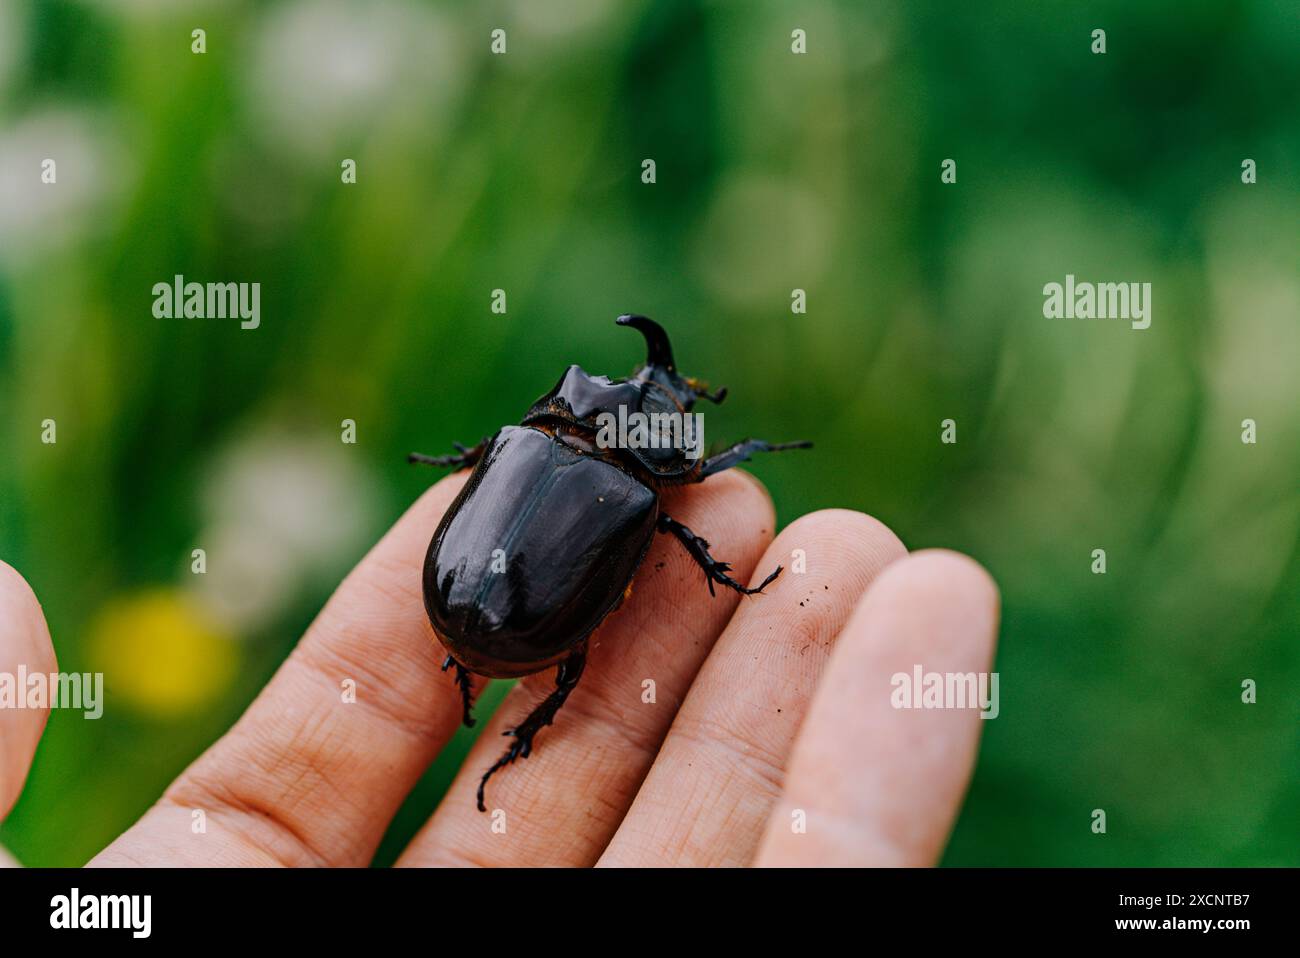 Close-up shot of hand holding rhinoceros beetle. Image highlights beetle shiny black exoskeleton and distinctive horn, set against blurred green background, showcasing fascinating details of this insect.  Stock Photo